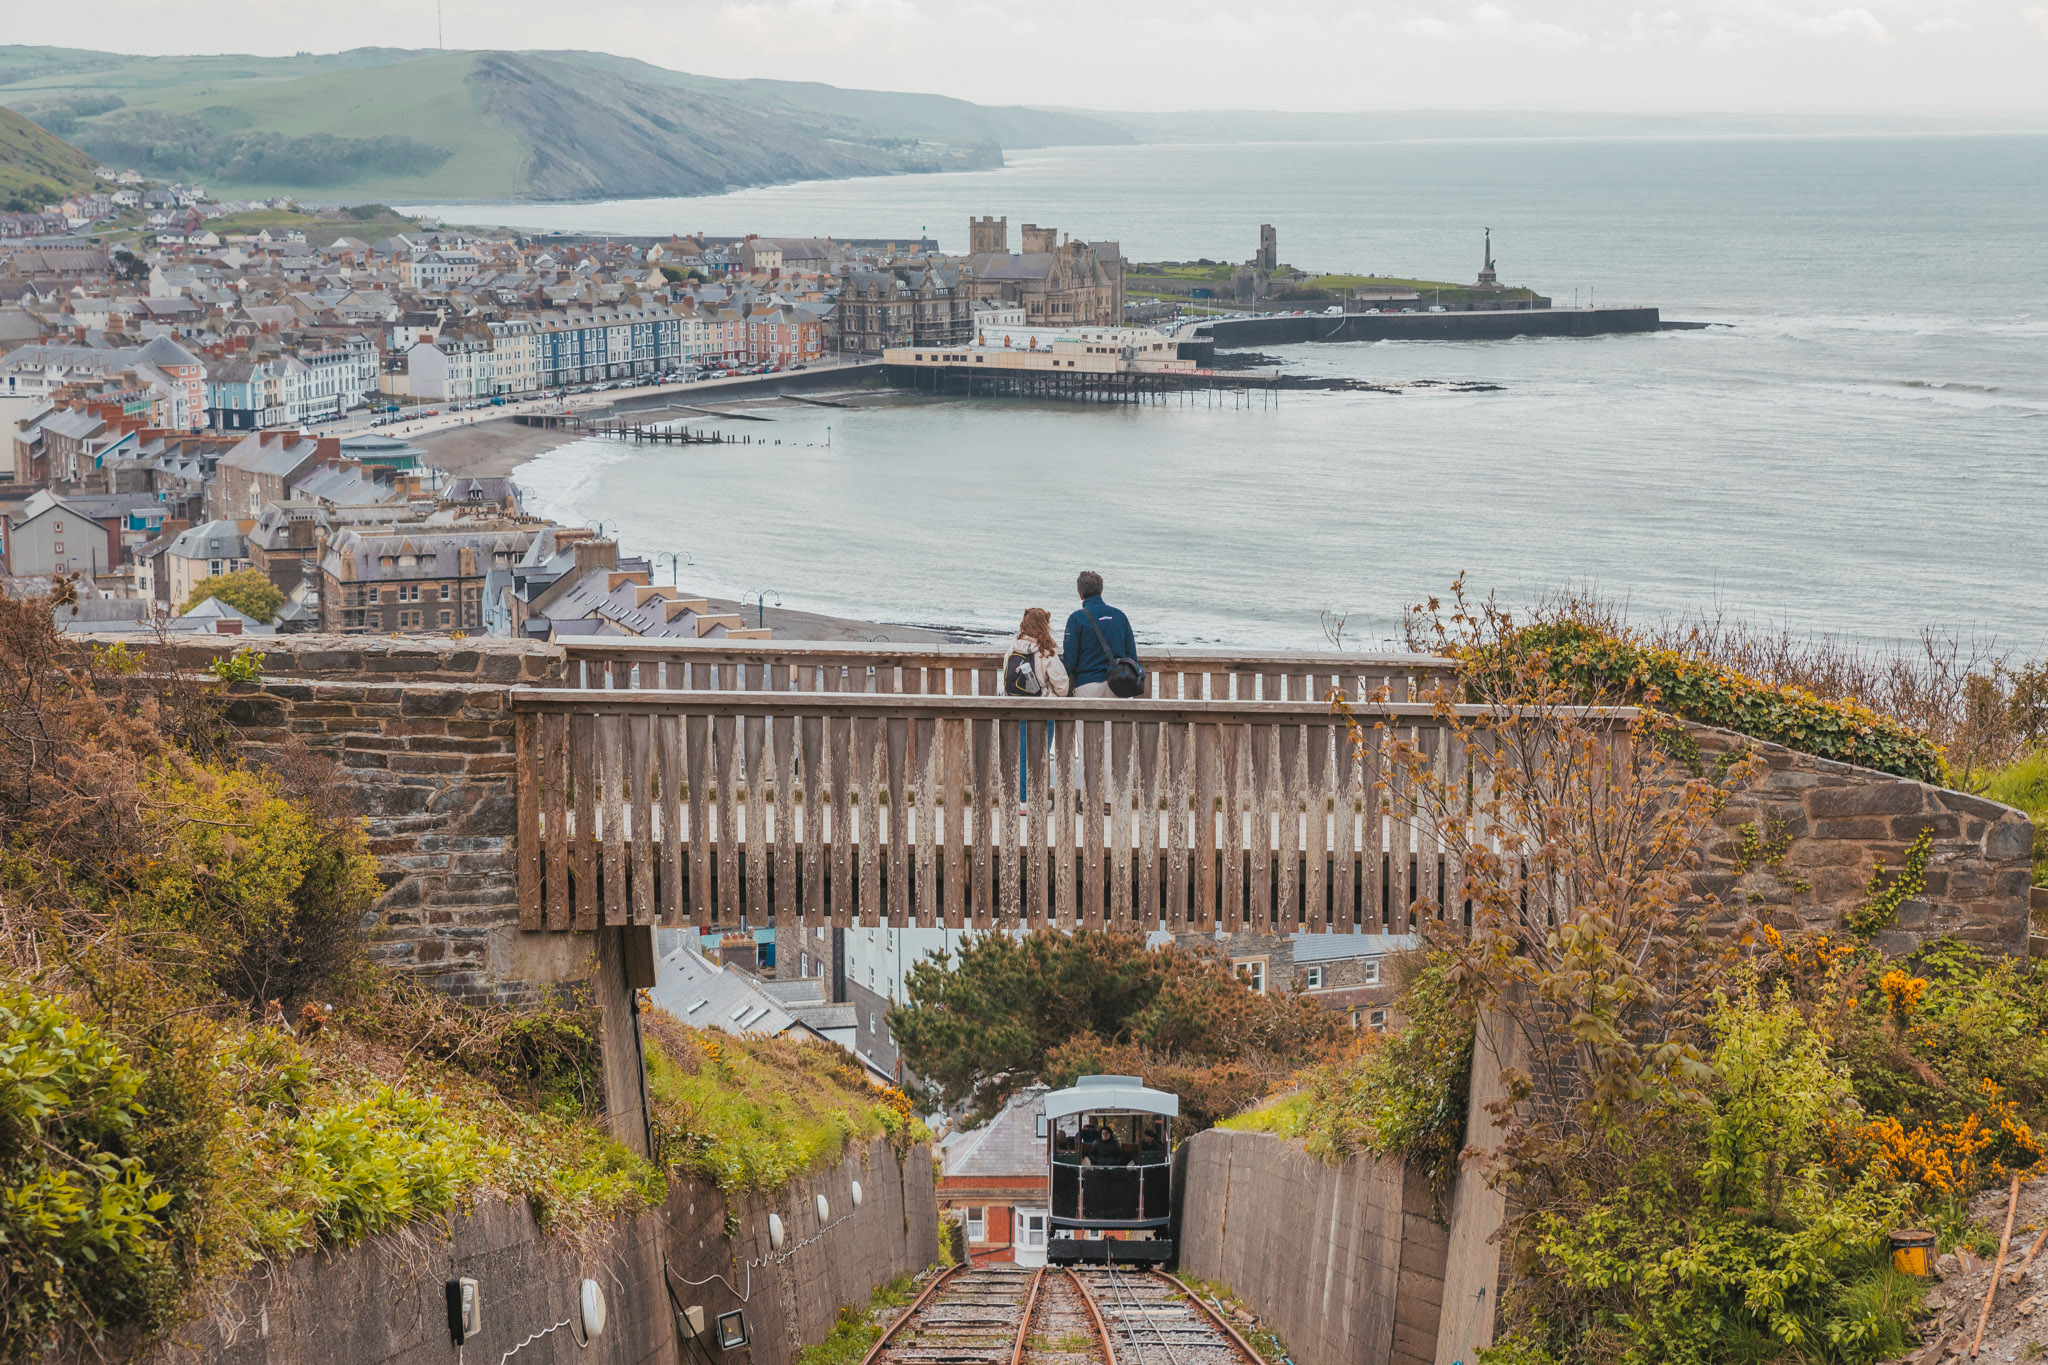 Aberystwyth Cliff Railway // The Most Beautiful Places to Visit in Wales // #readysetjetset #wales #uk #welsh #travel #photospots #blogpost